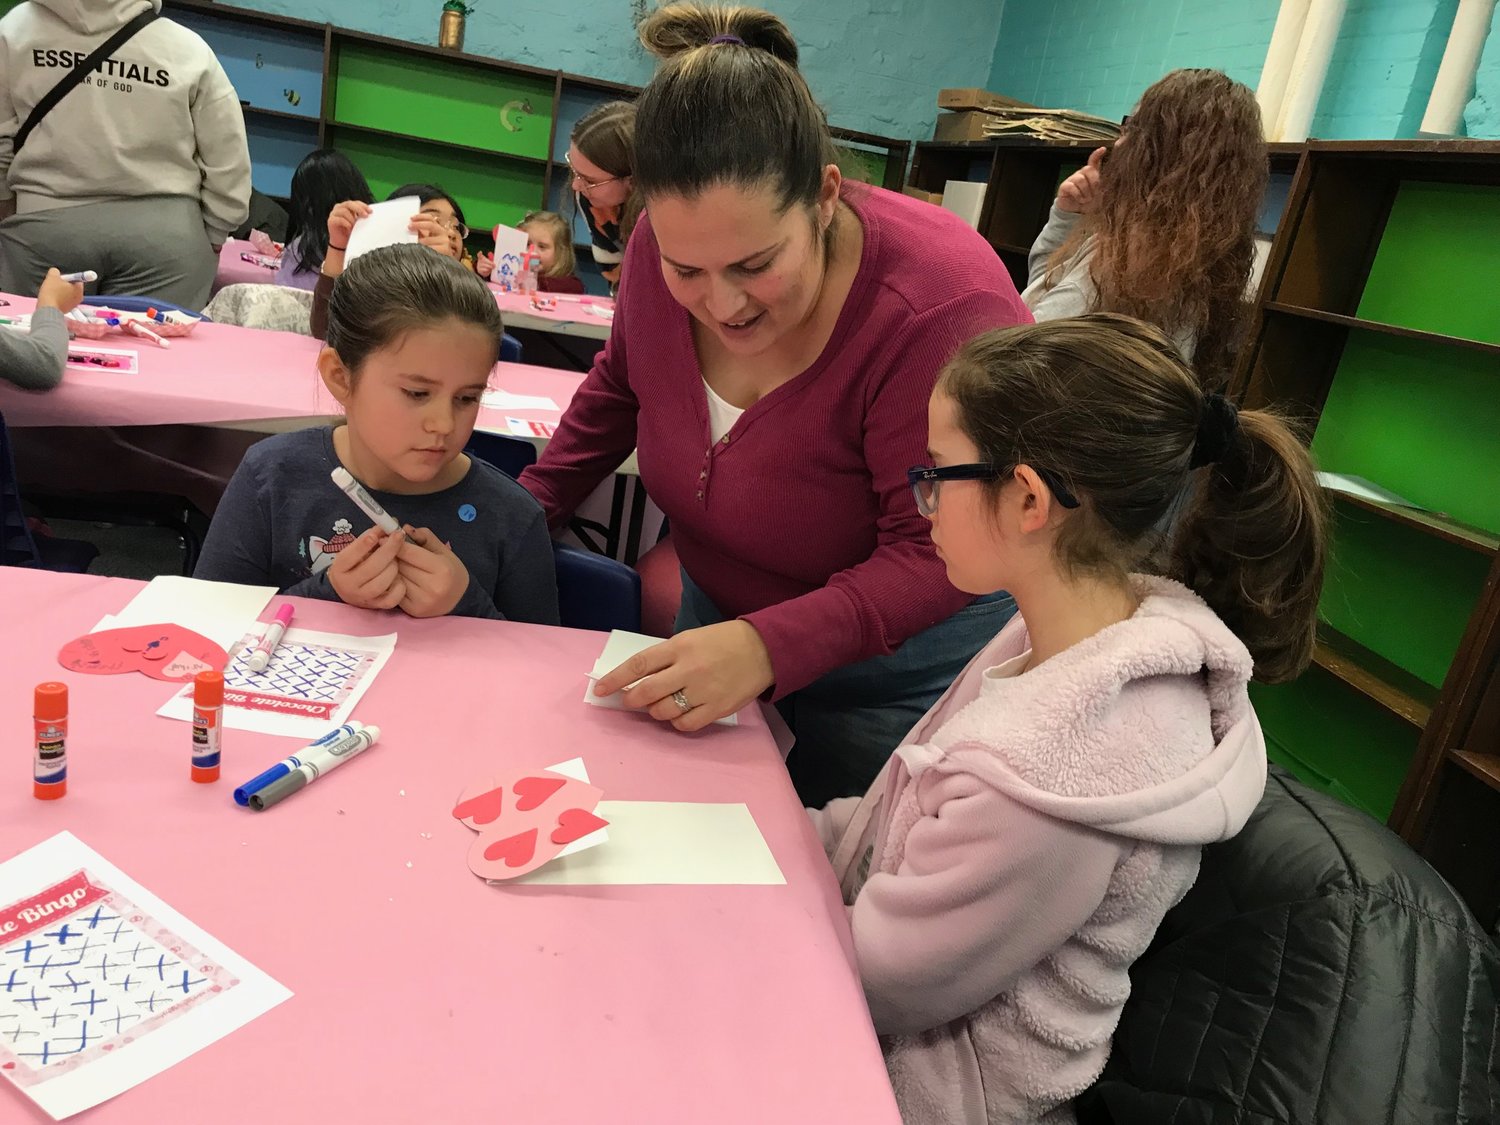 Becca Swalgin, center, takes a peak at the Valentine's Day crafts made by daughters Victoria, left, and Gabby Saturday, Feb. 11 during a special children's program at the Utica Public Library.